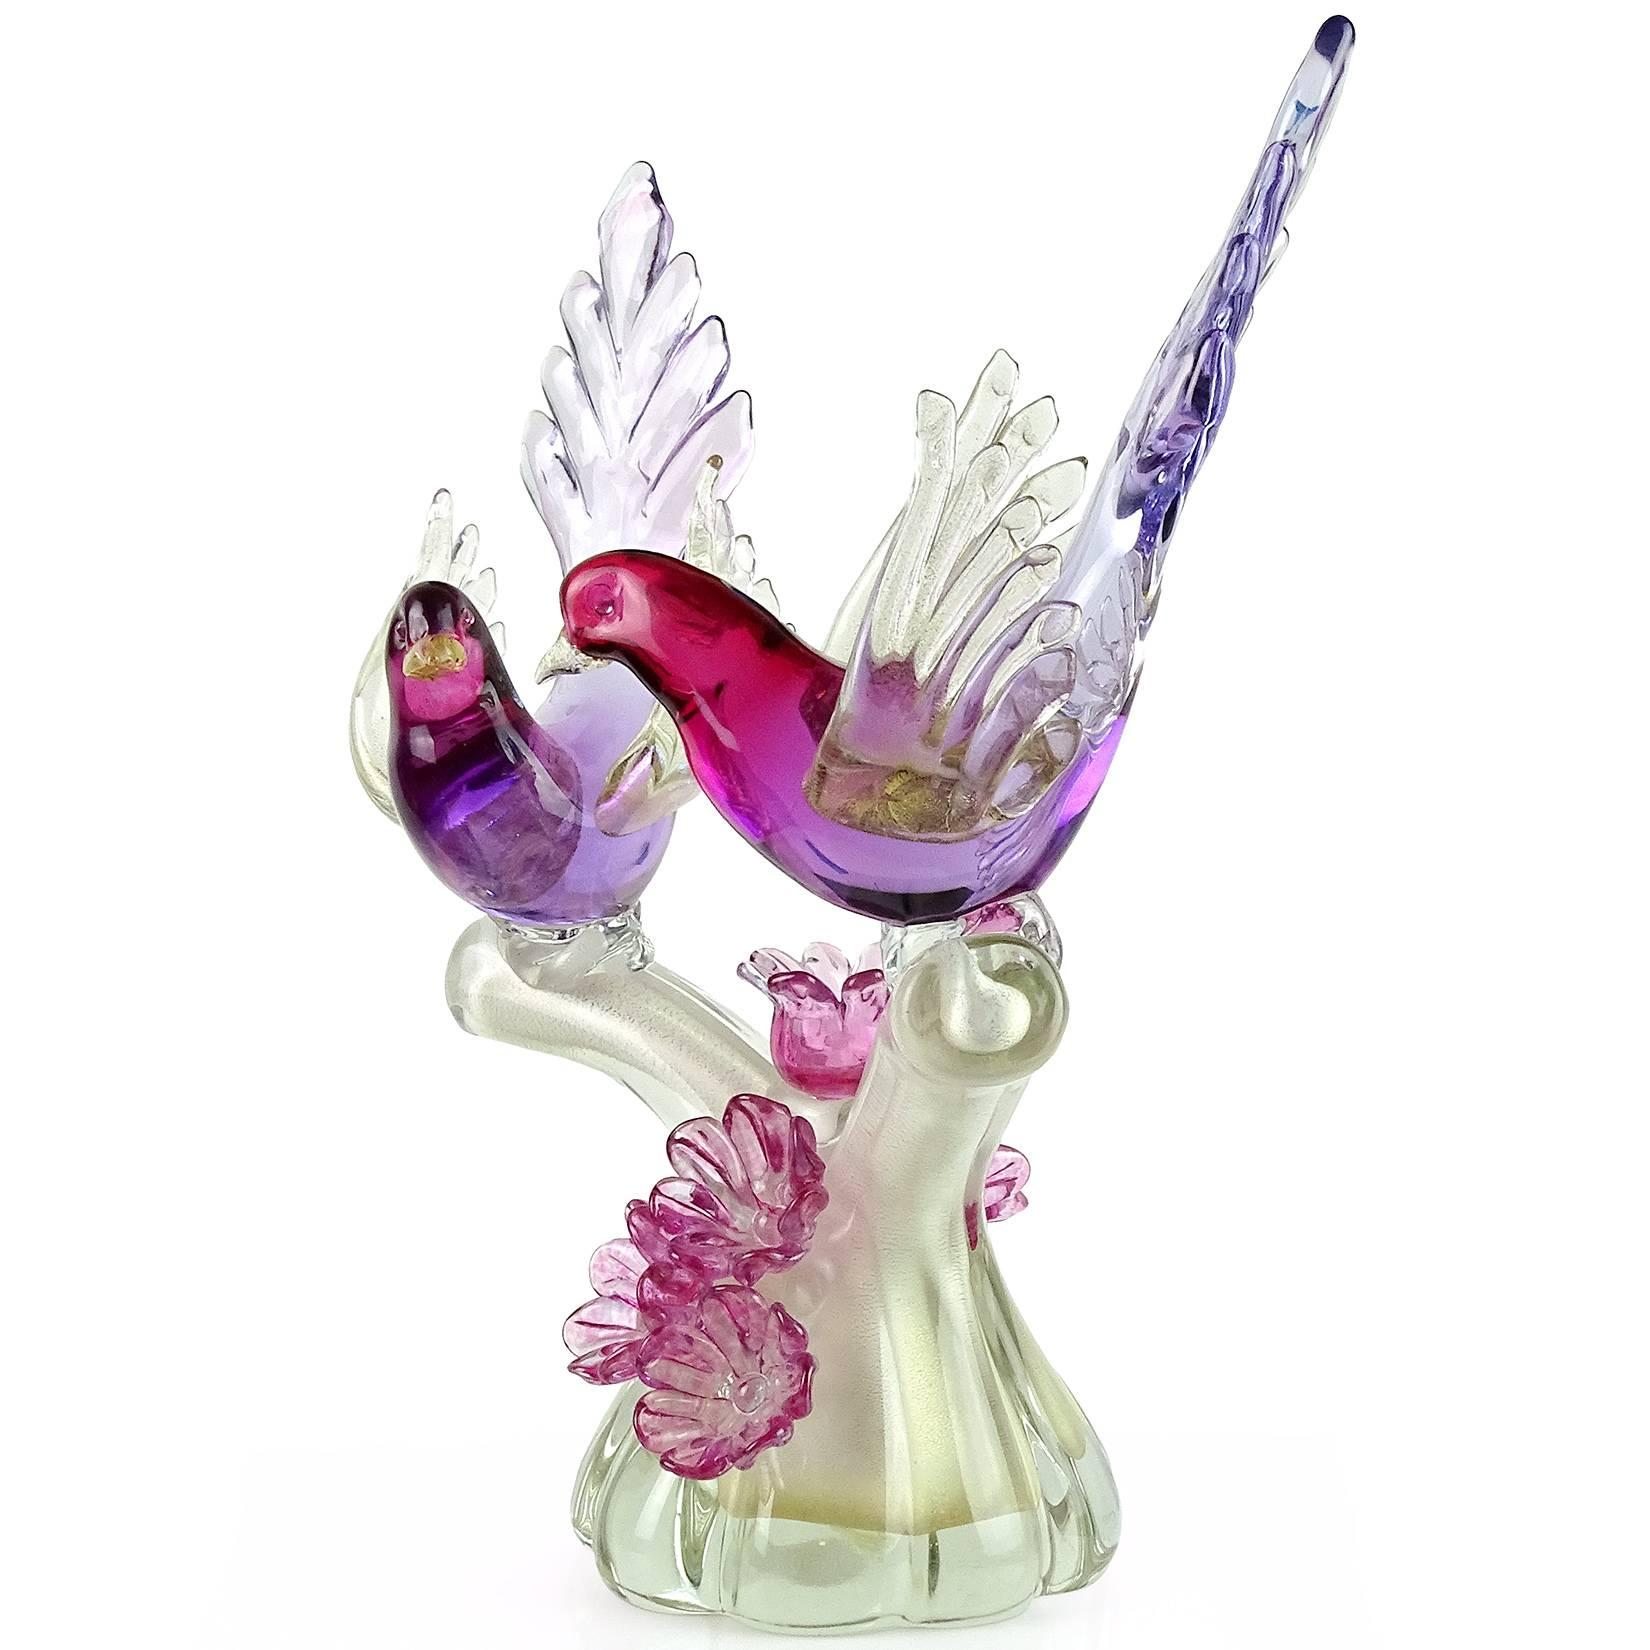 Gorgeous vintage Murano hand blown Sommerso cranberry to purple and gold flecks Italian art glass birds centerpiece / candleholder. Documented to designer Alfredo Barbini. The piece is profusely covered in gold leaf, with decorative flowers on the